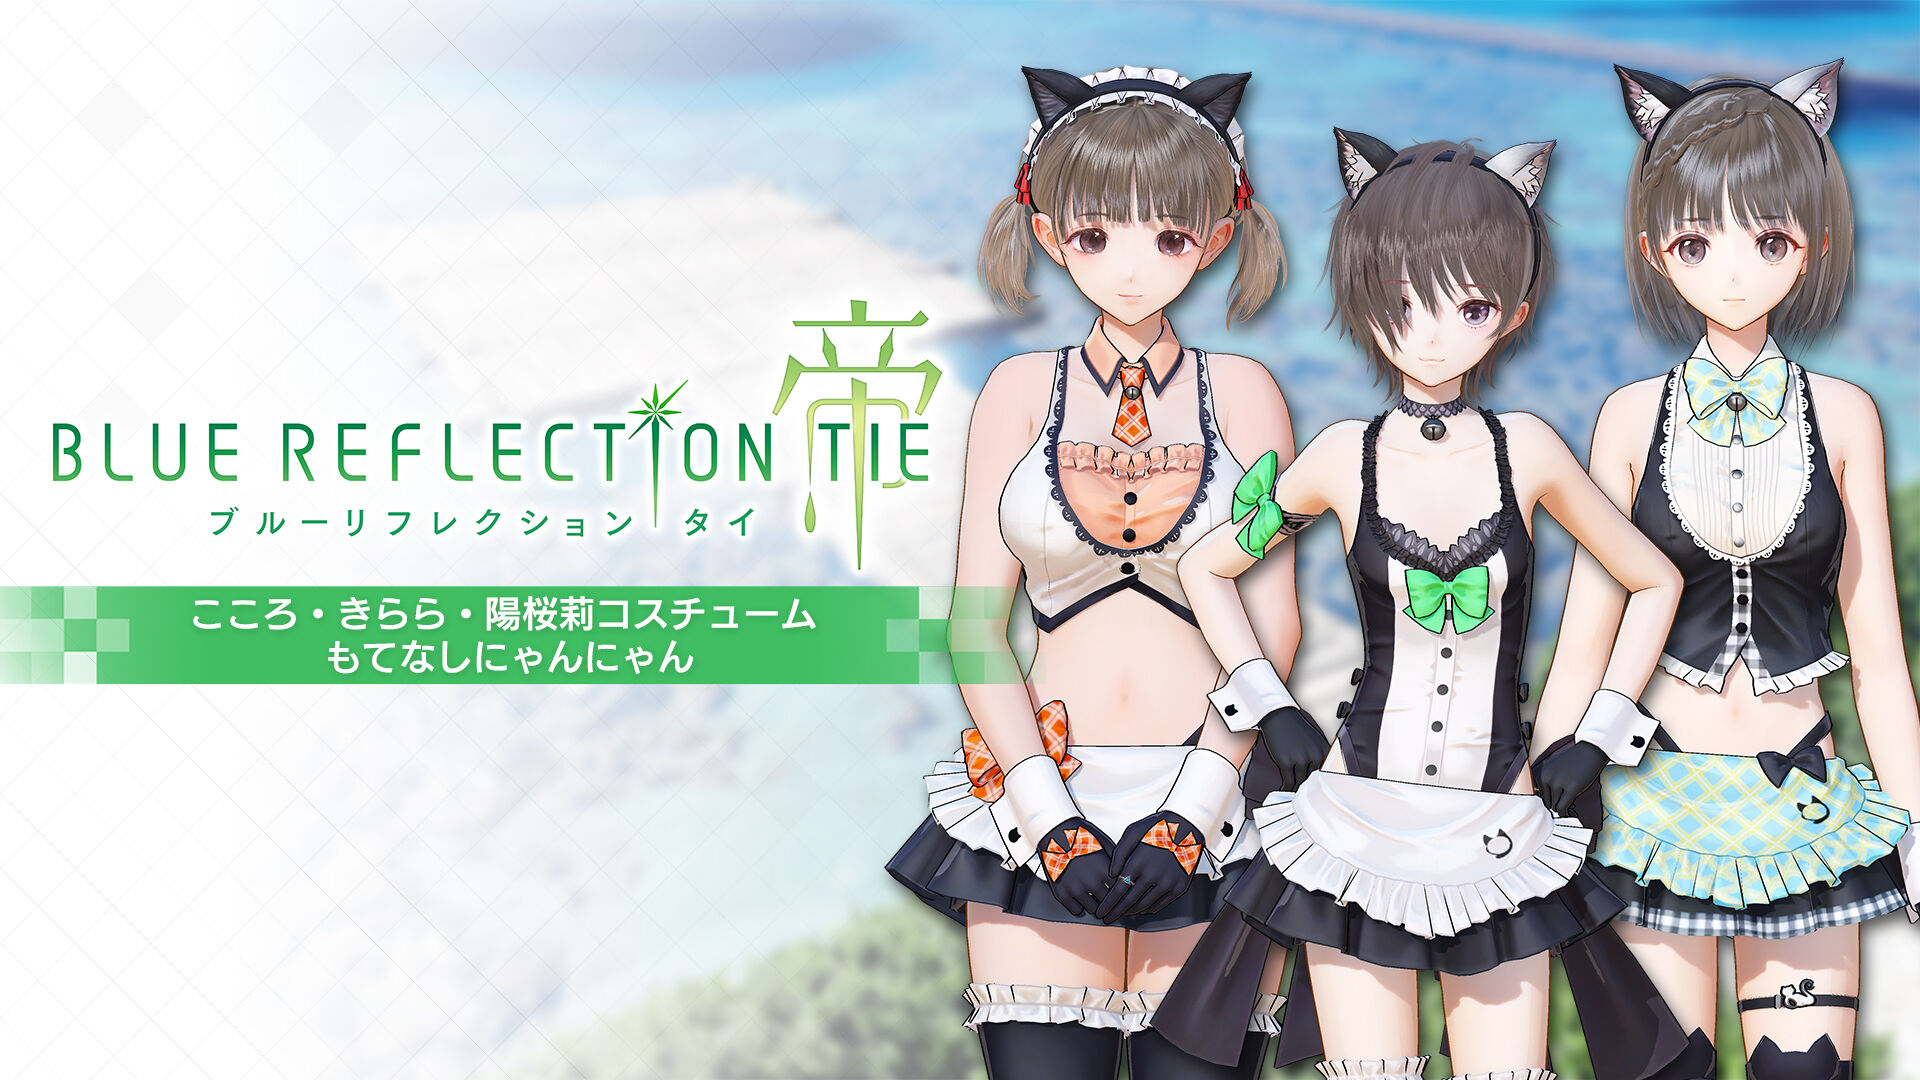 BLUE REFLECTION TIE/帝 Digital Deluxe with Season Pass